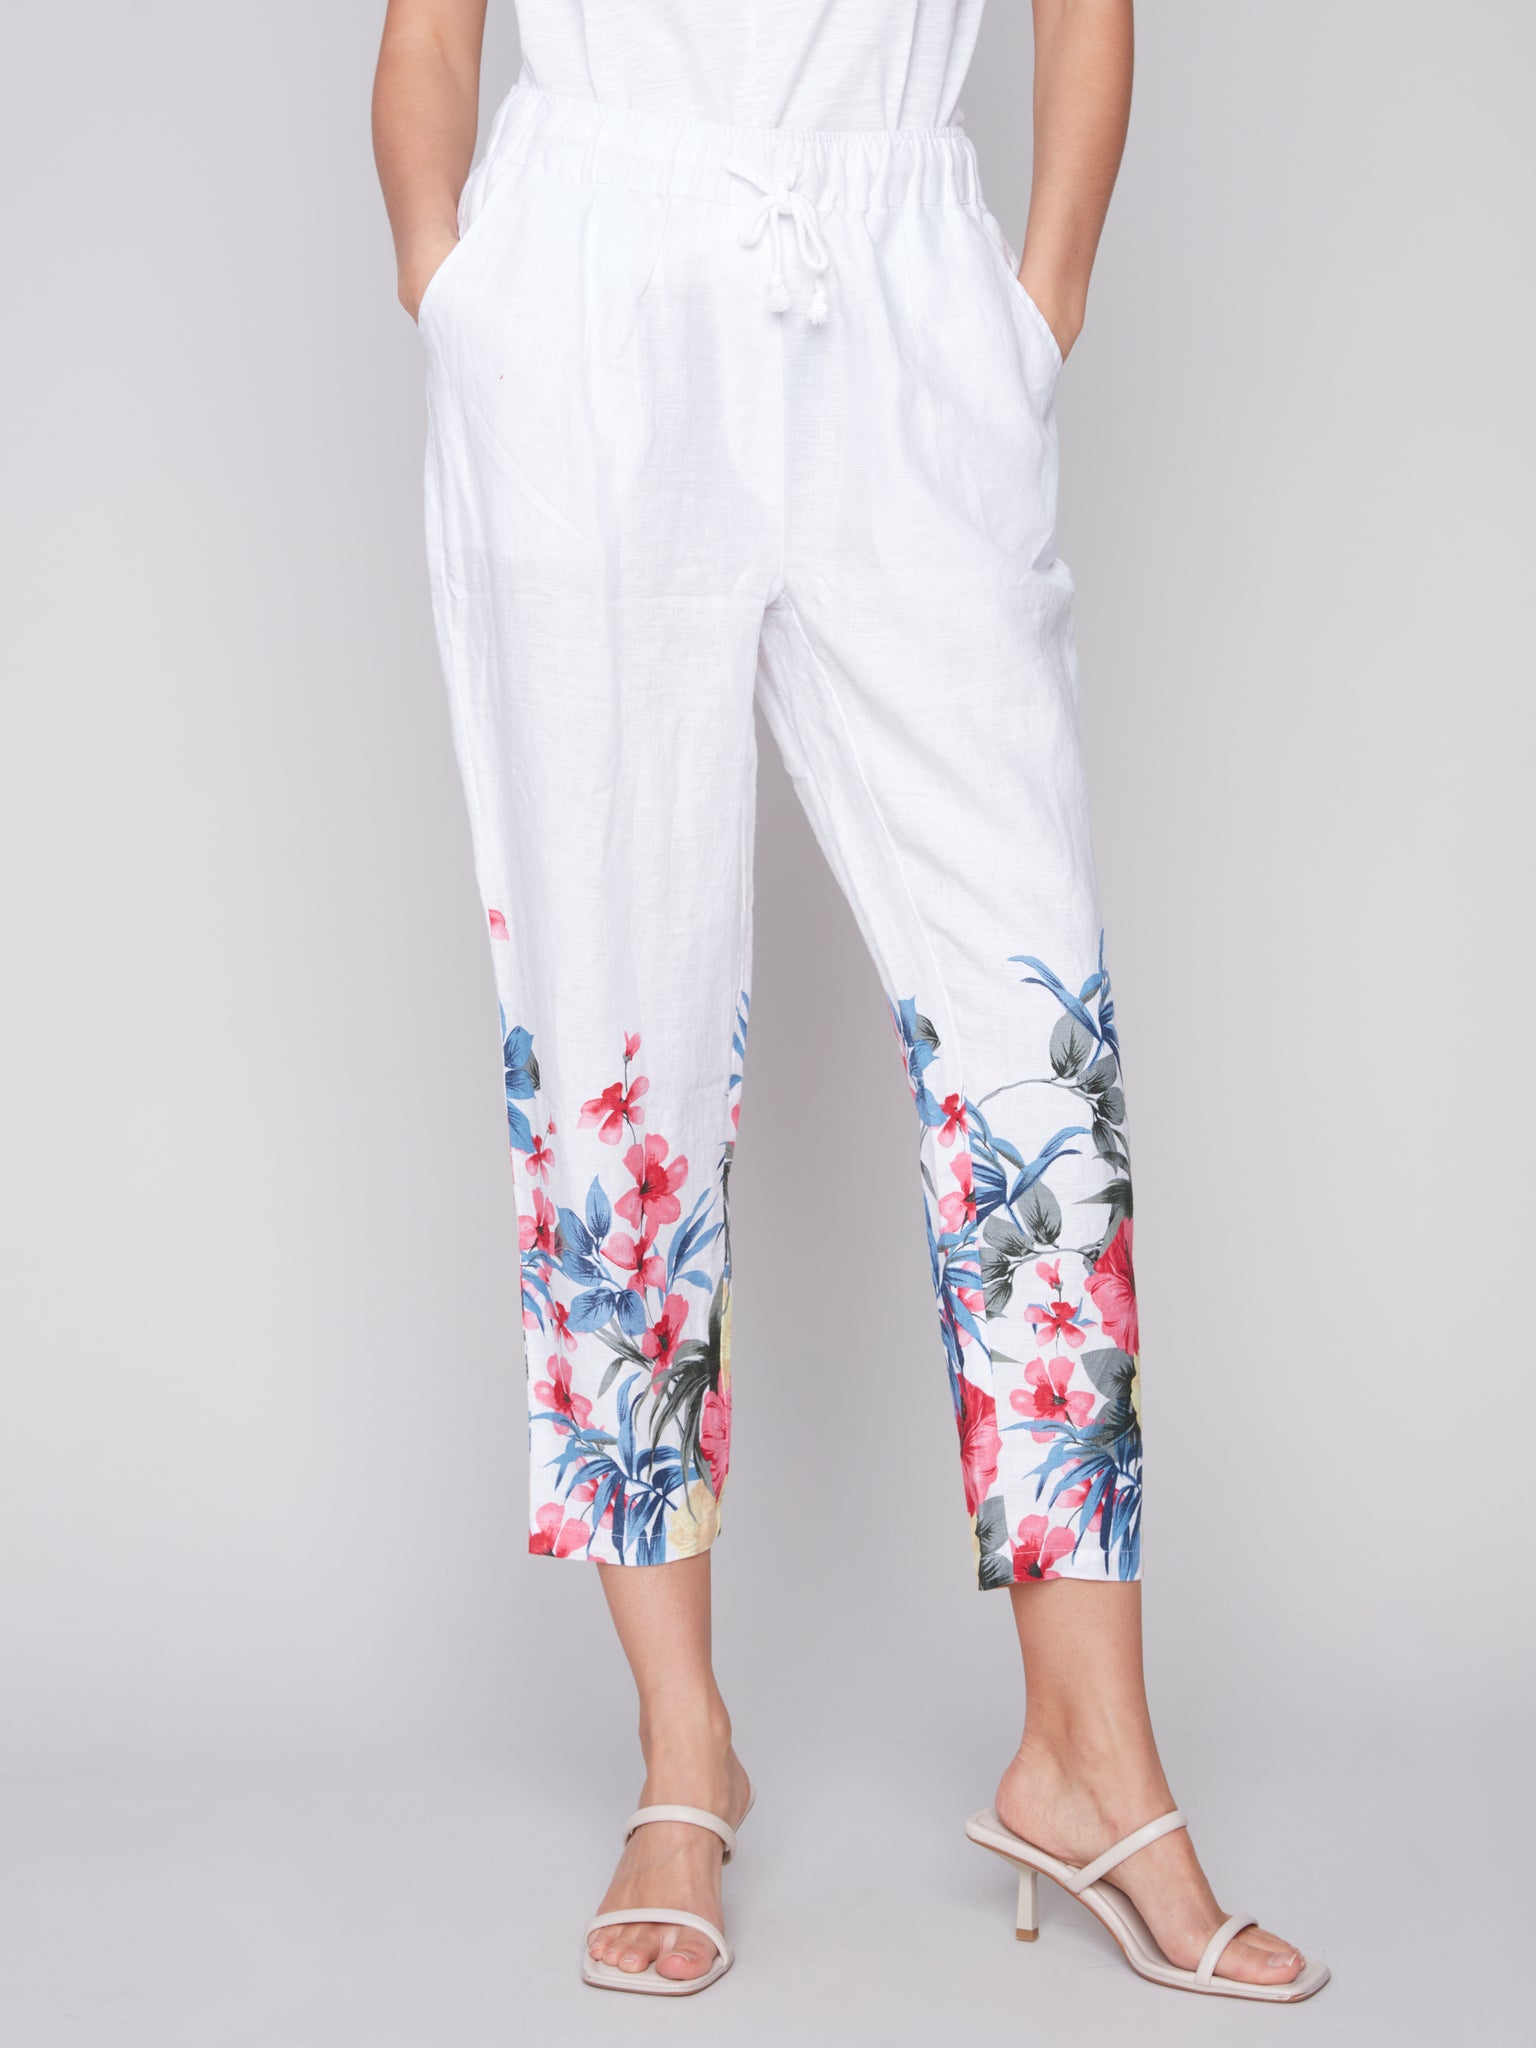 CHARLIE B C5382RP PRINTED LINEN PULL-ON PANT